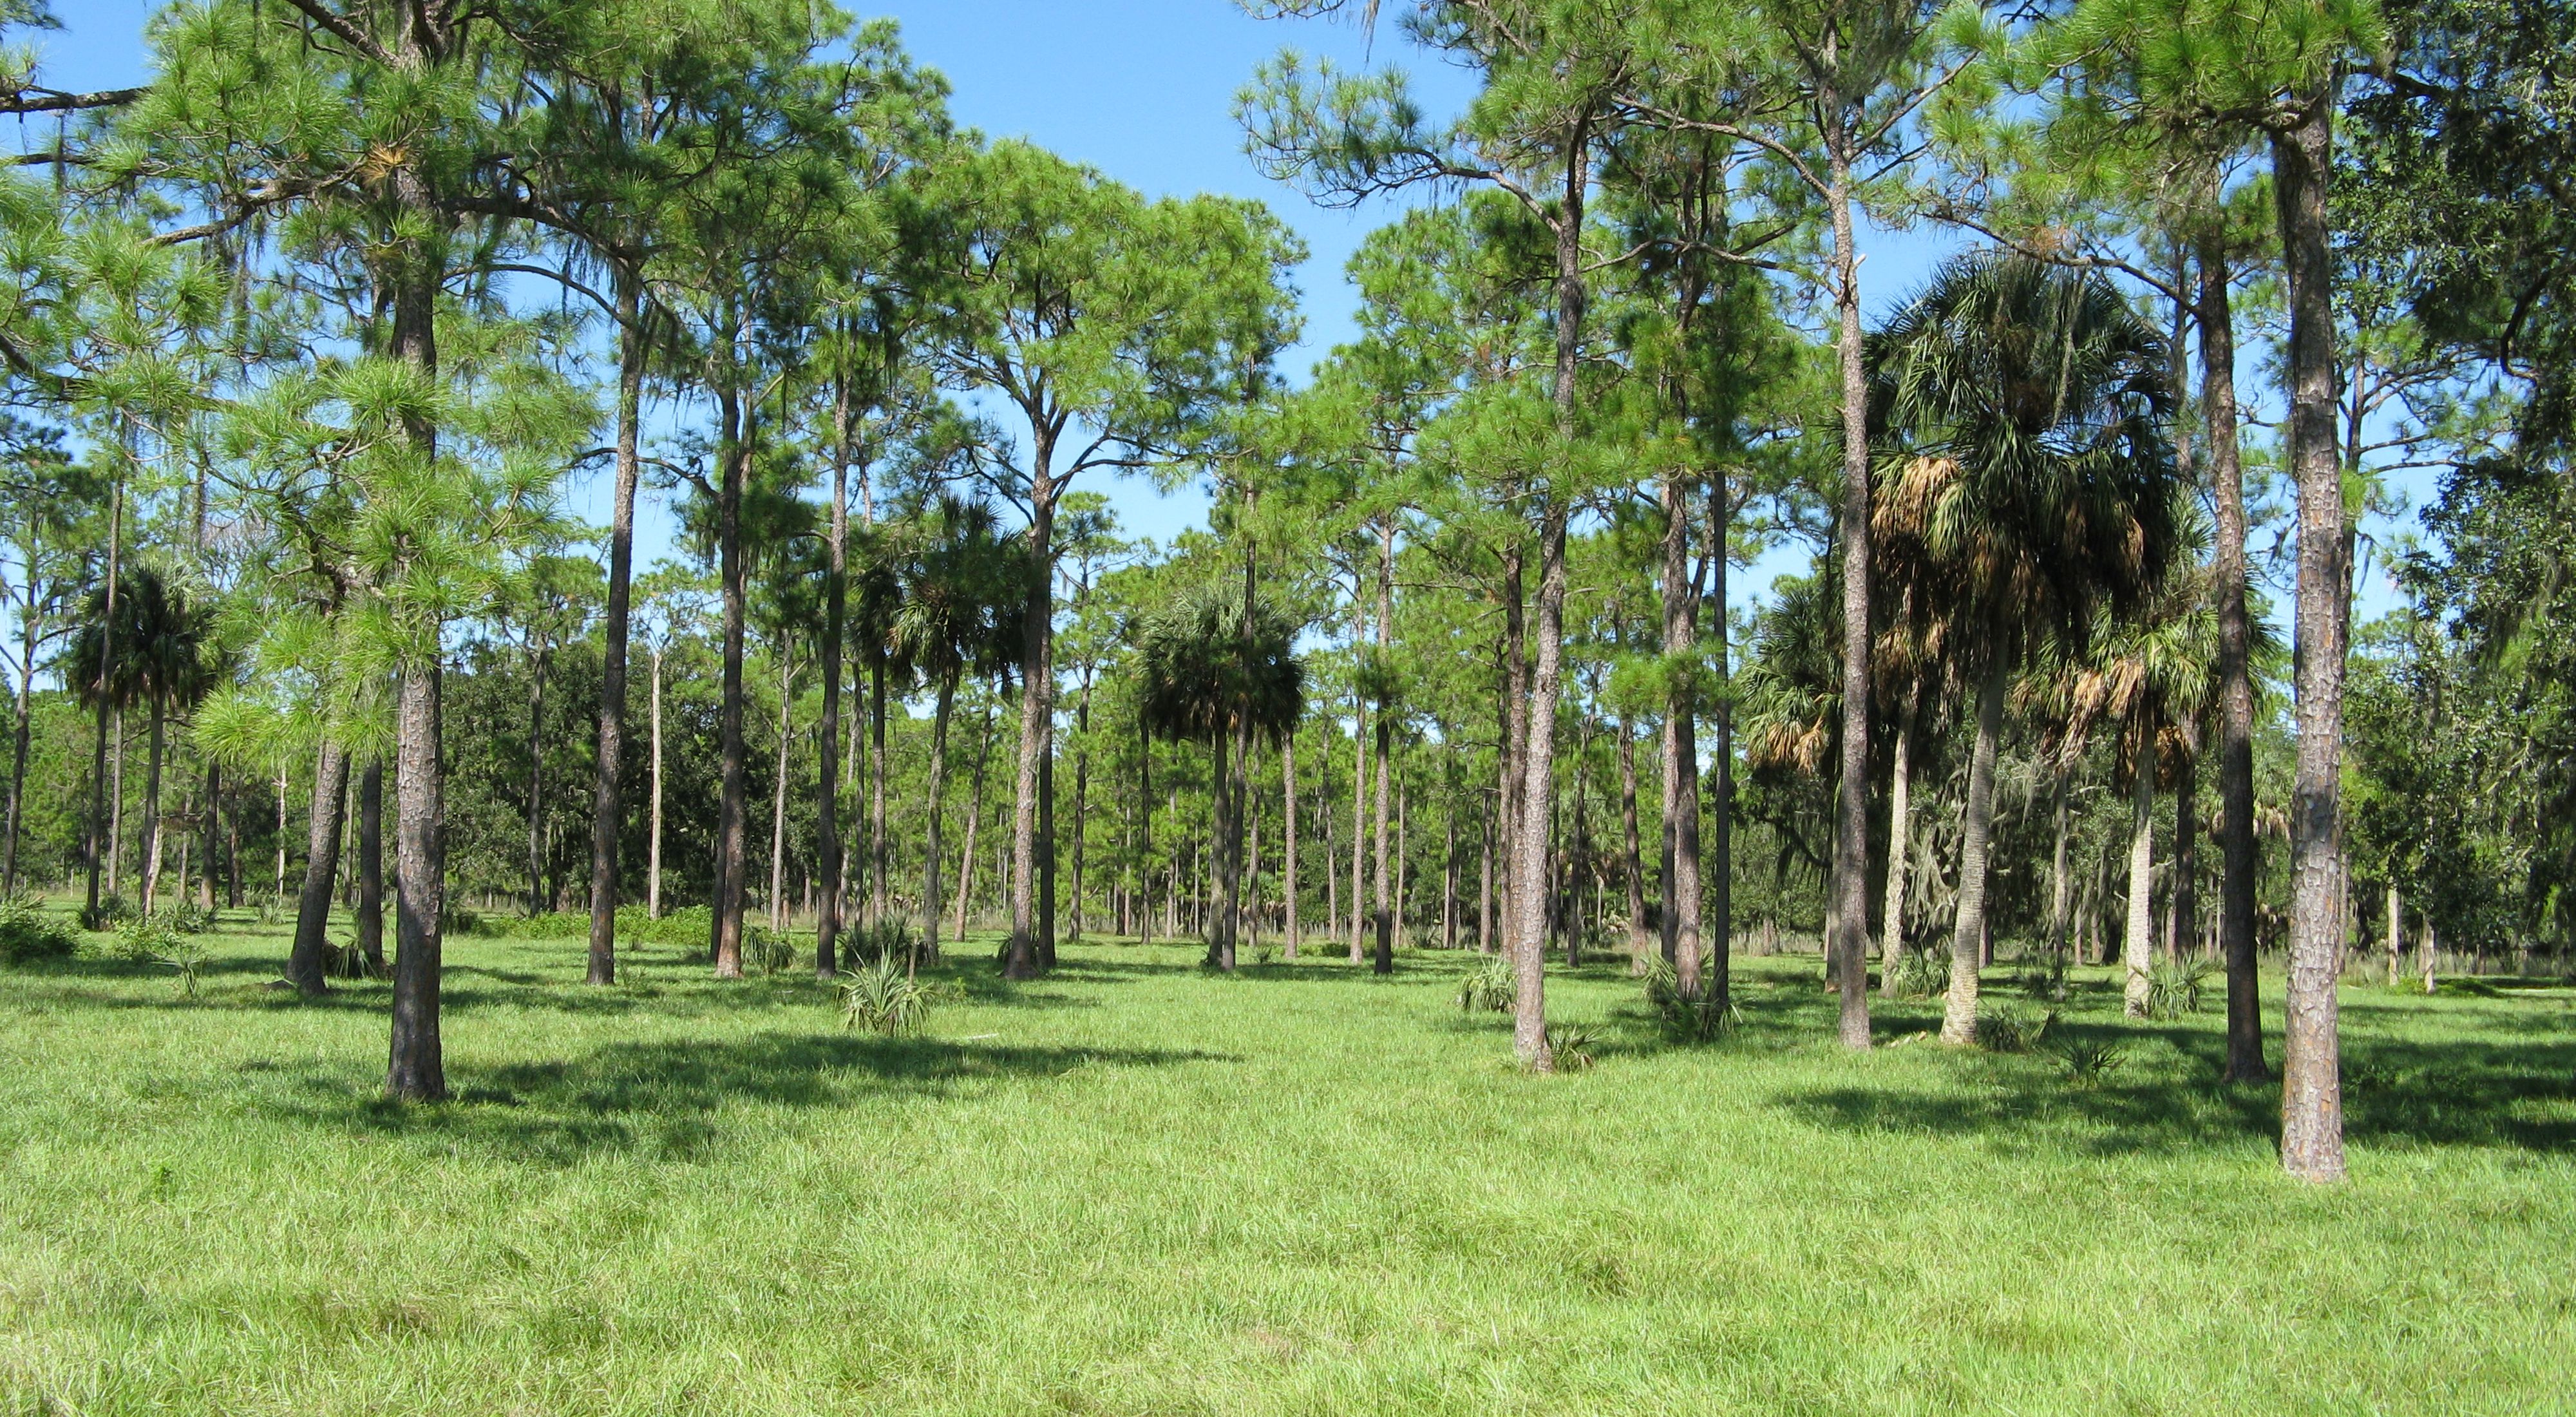 View of trees in a field at Rafter T Ranch in central Florida.